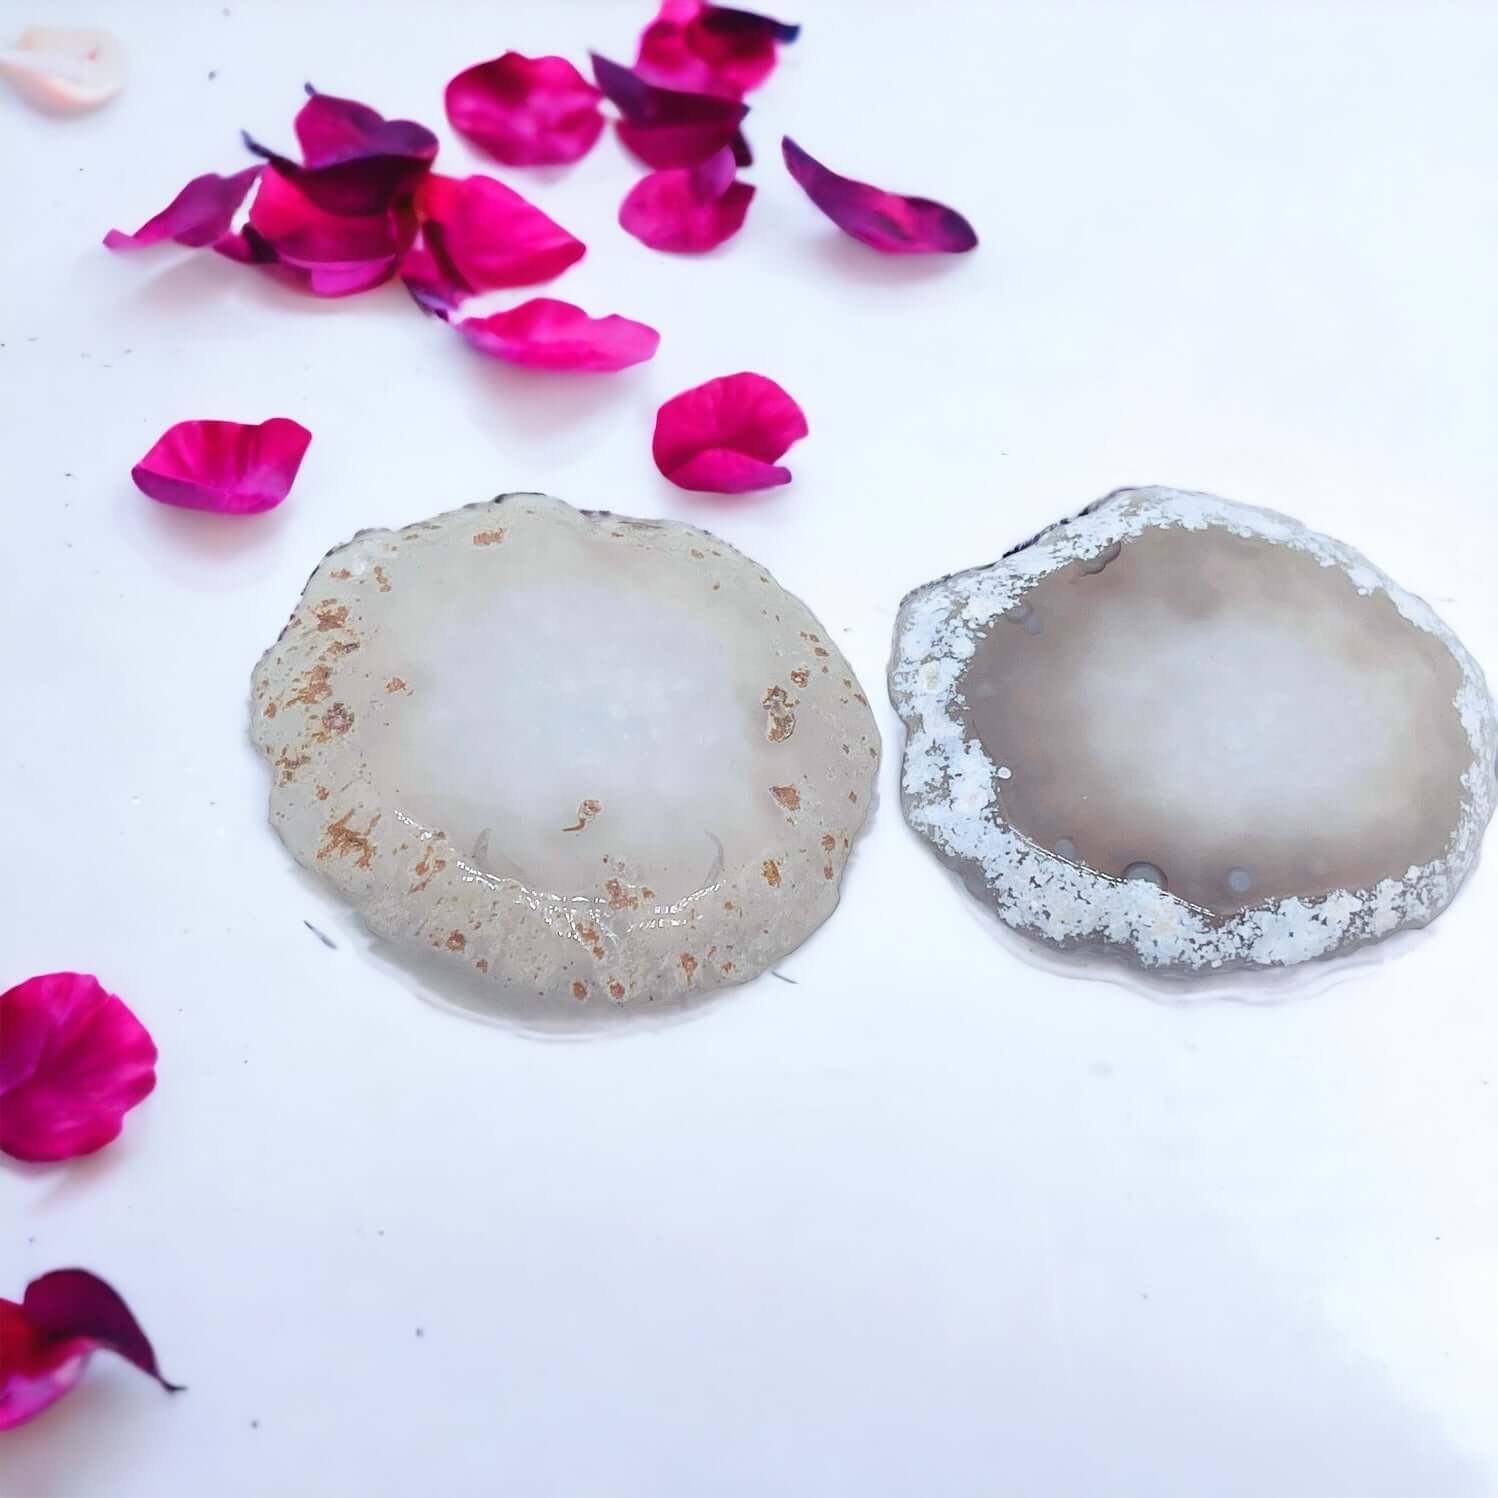 White agate pop socket phone holder with petals on white background